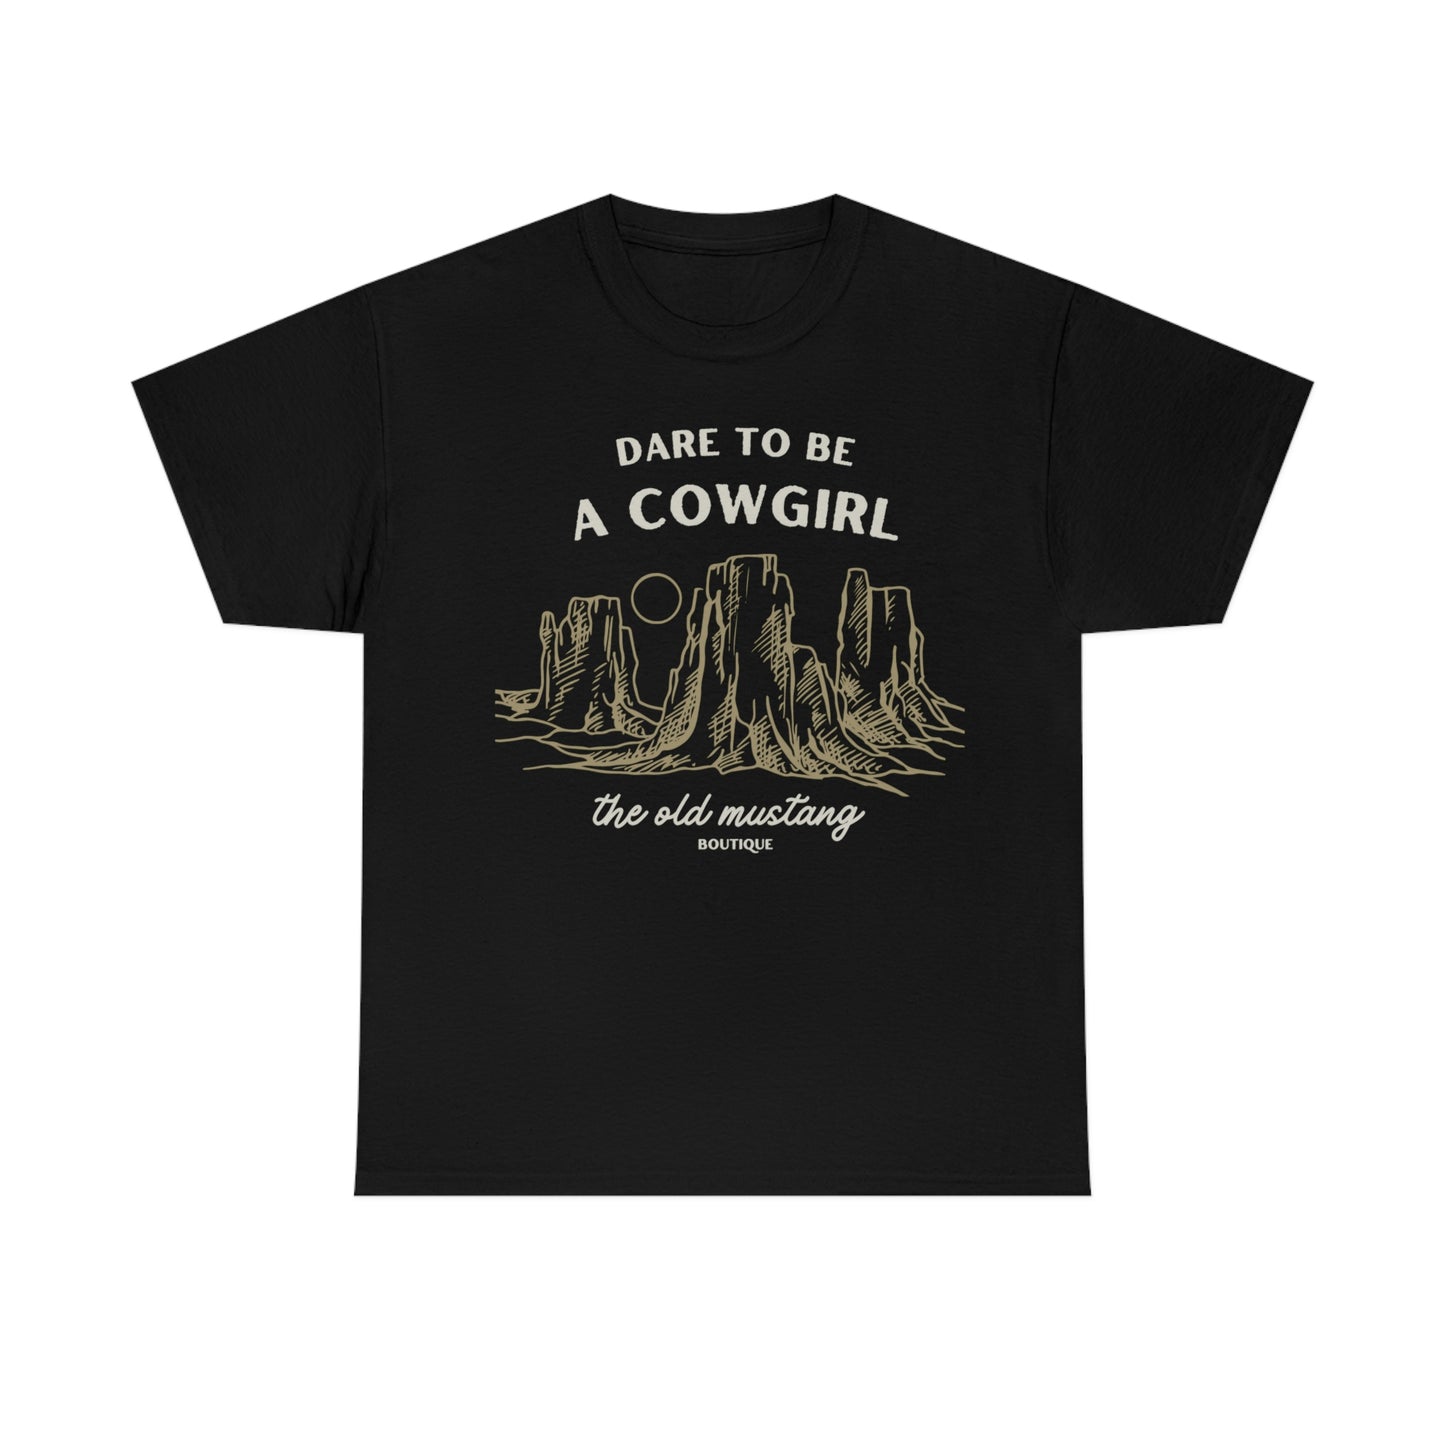 Dare to Be a Cowgirl Graphic Tee